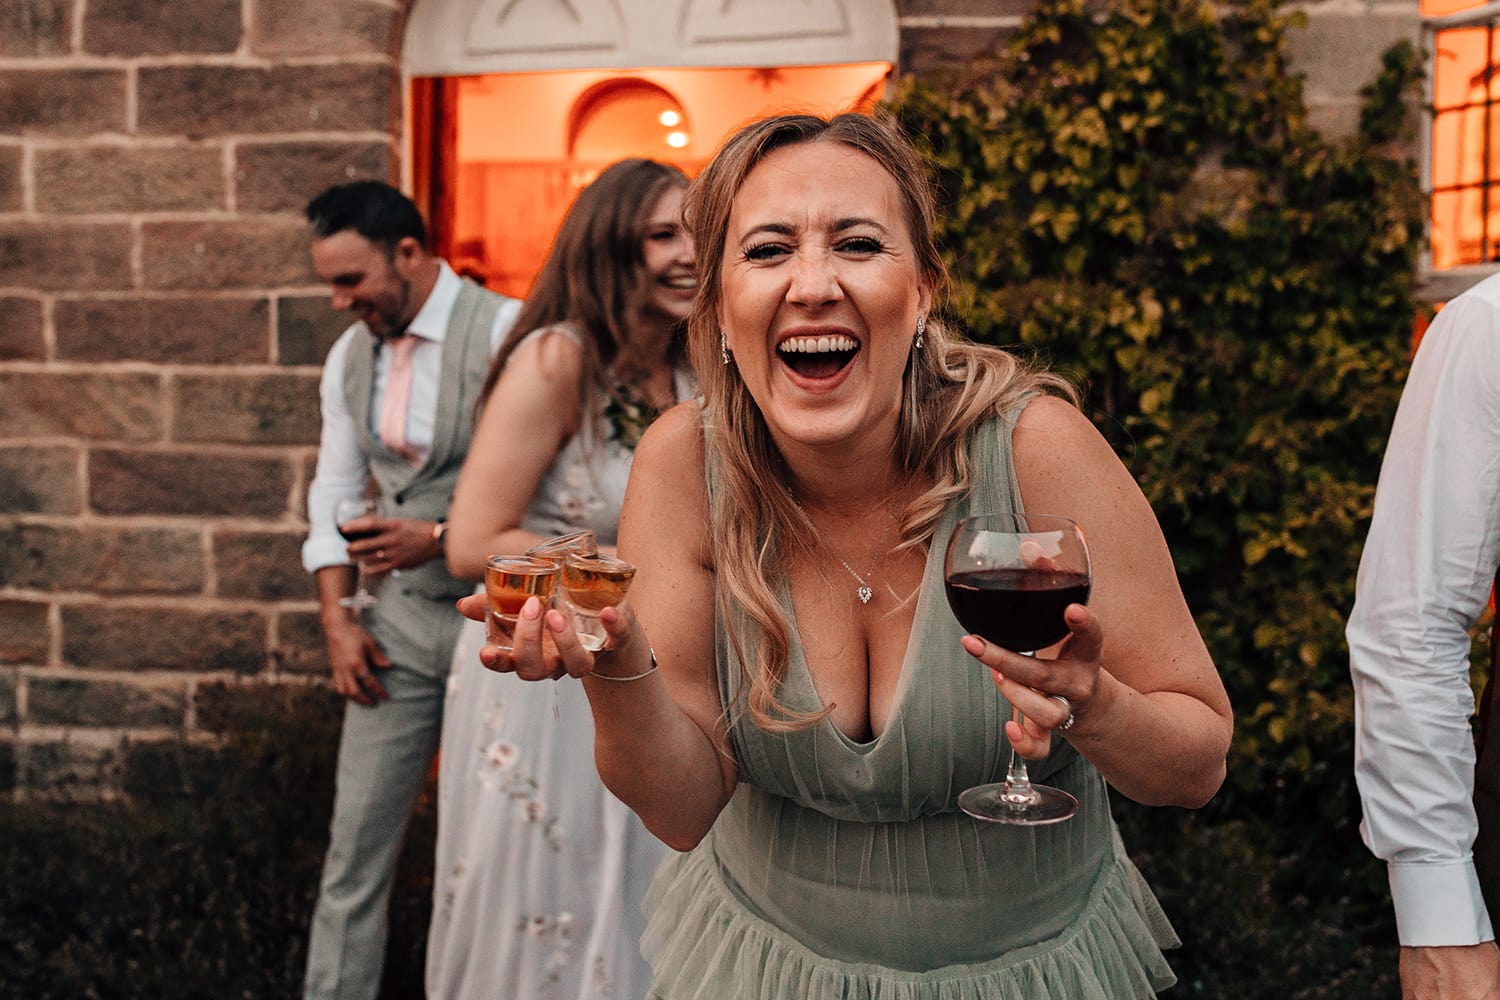 Candid wedding photograph of a wedding guest with three tequilas in her hands